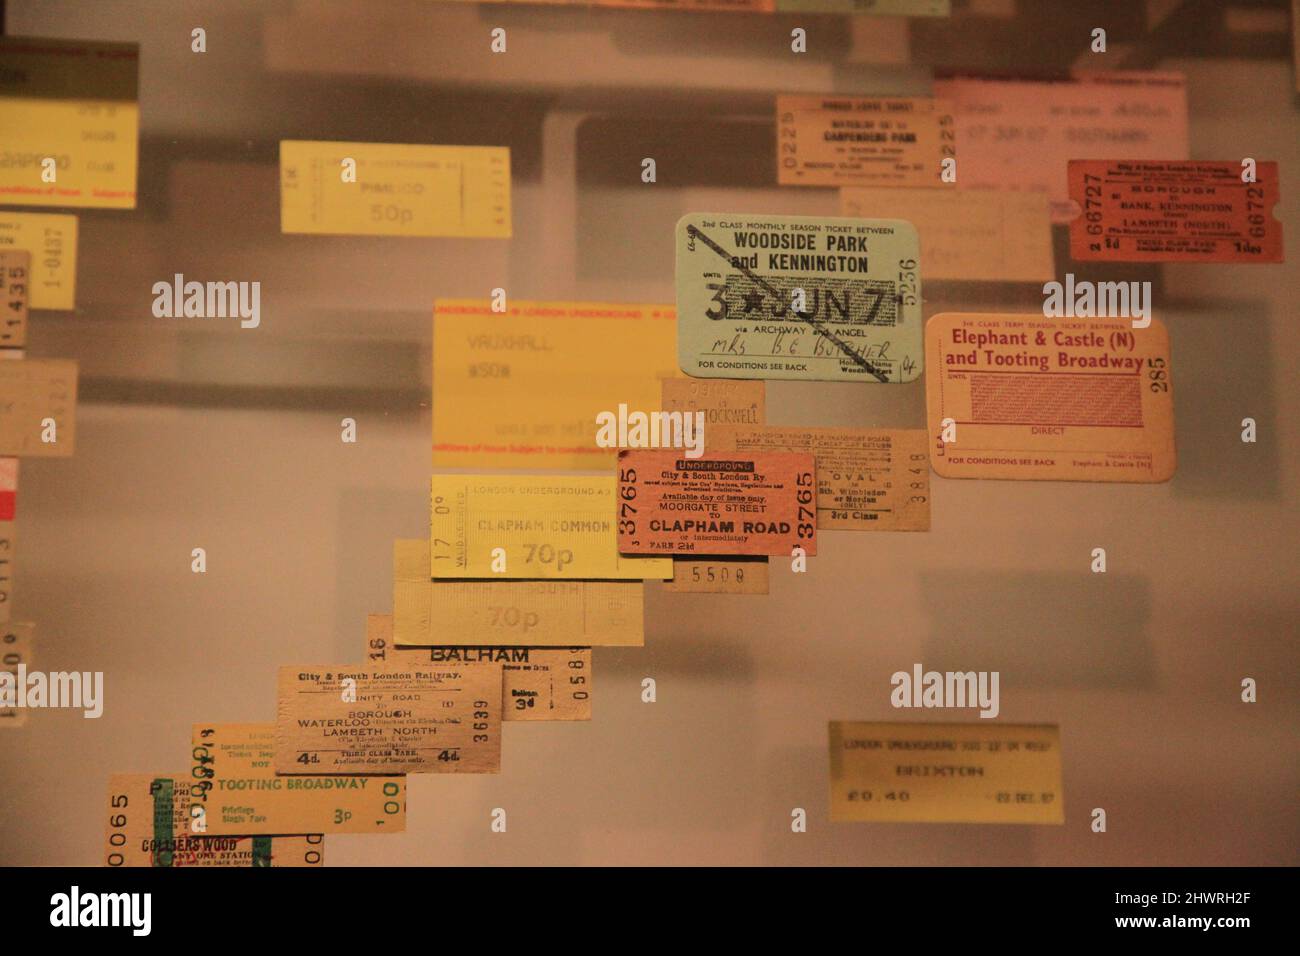 London's transport museum collection of ancient tickets Stock Photo